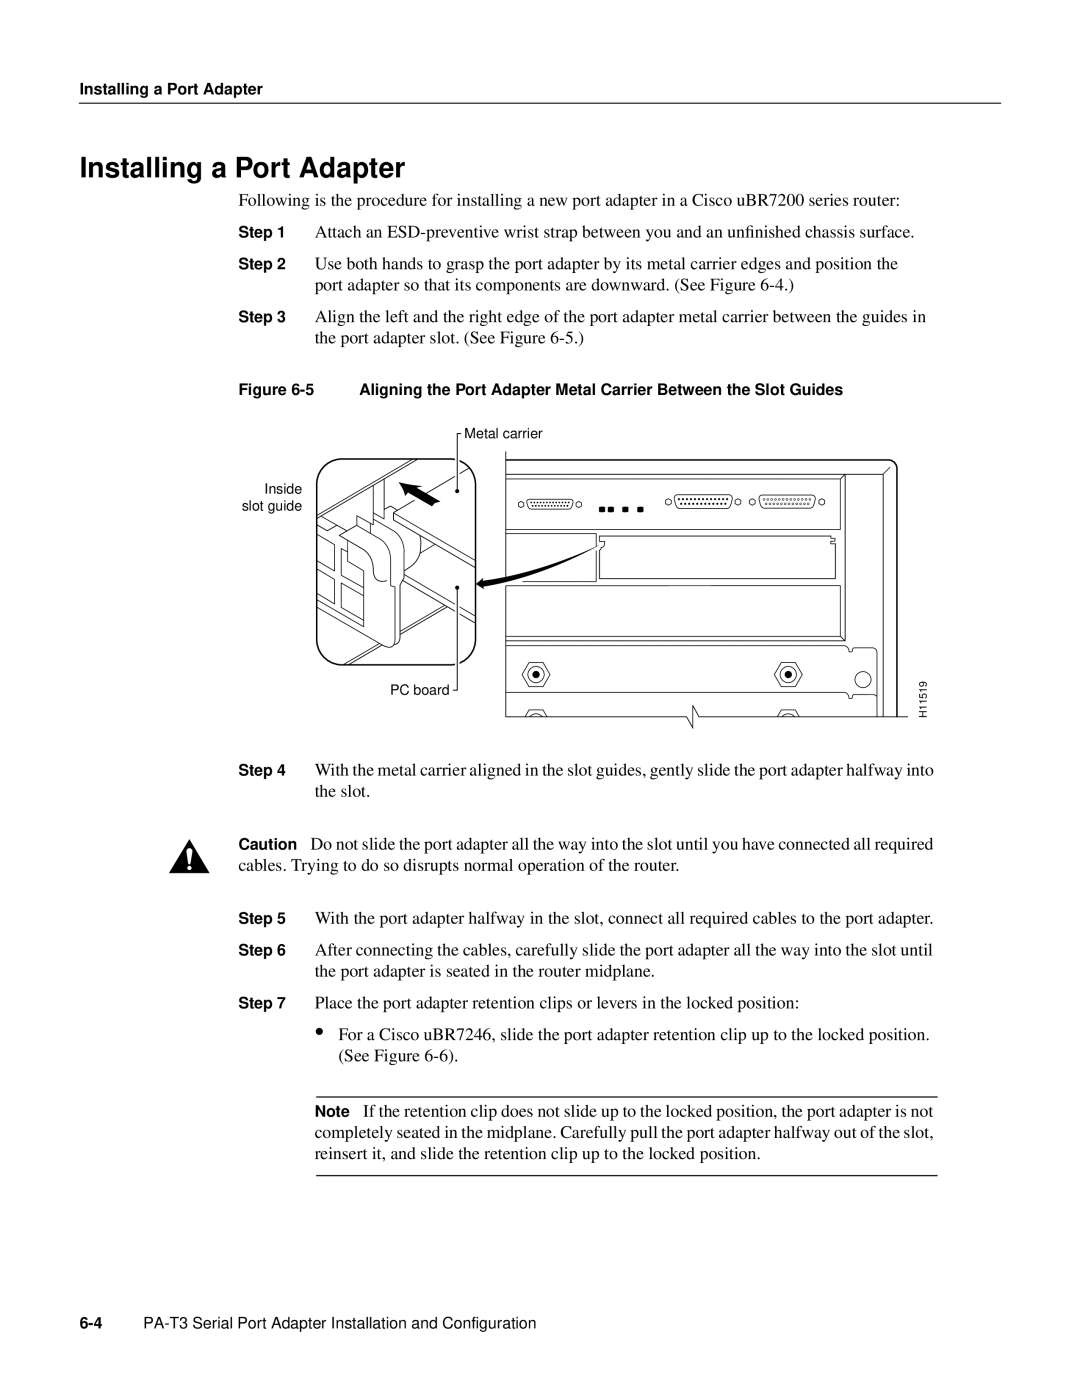 Cisco Systems manual Installing a Port Adapter, PA-T3 Serial Port Adapter Installation and Configuration, Metal carrier 